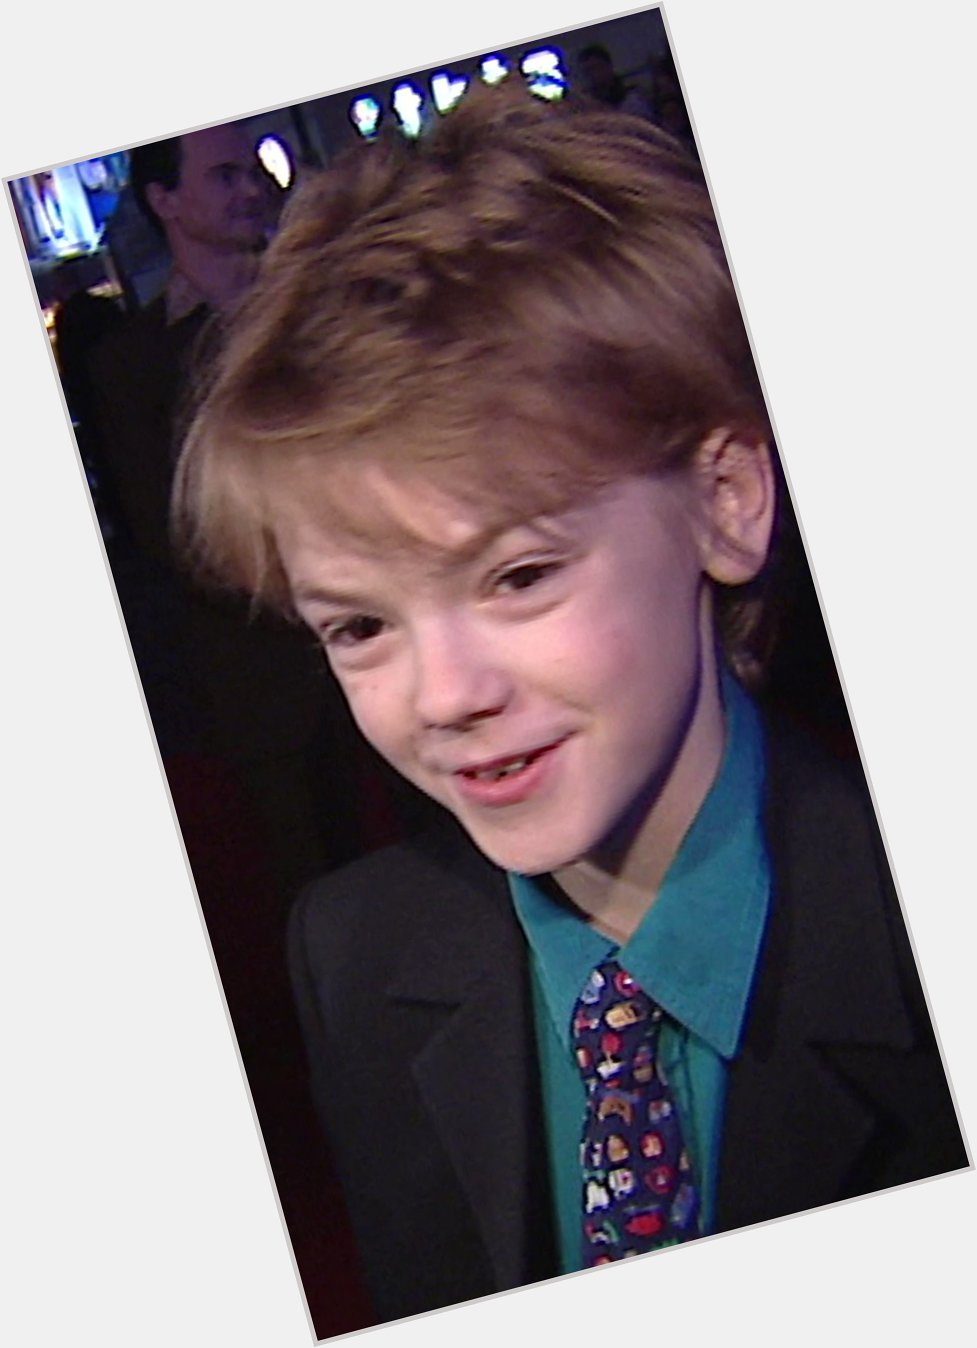 Where d all the time go? Happy 33rd birthday to Thomas Brodie-Sangster. 